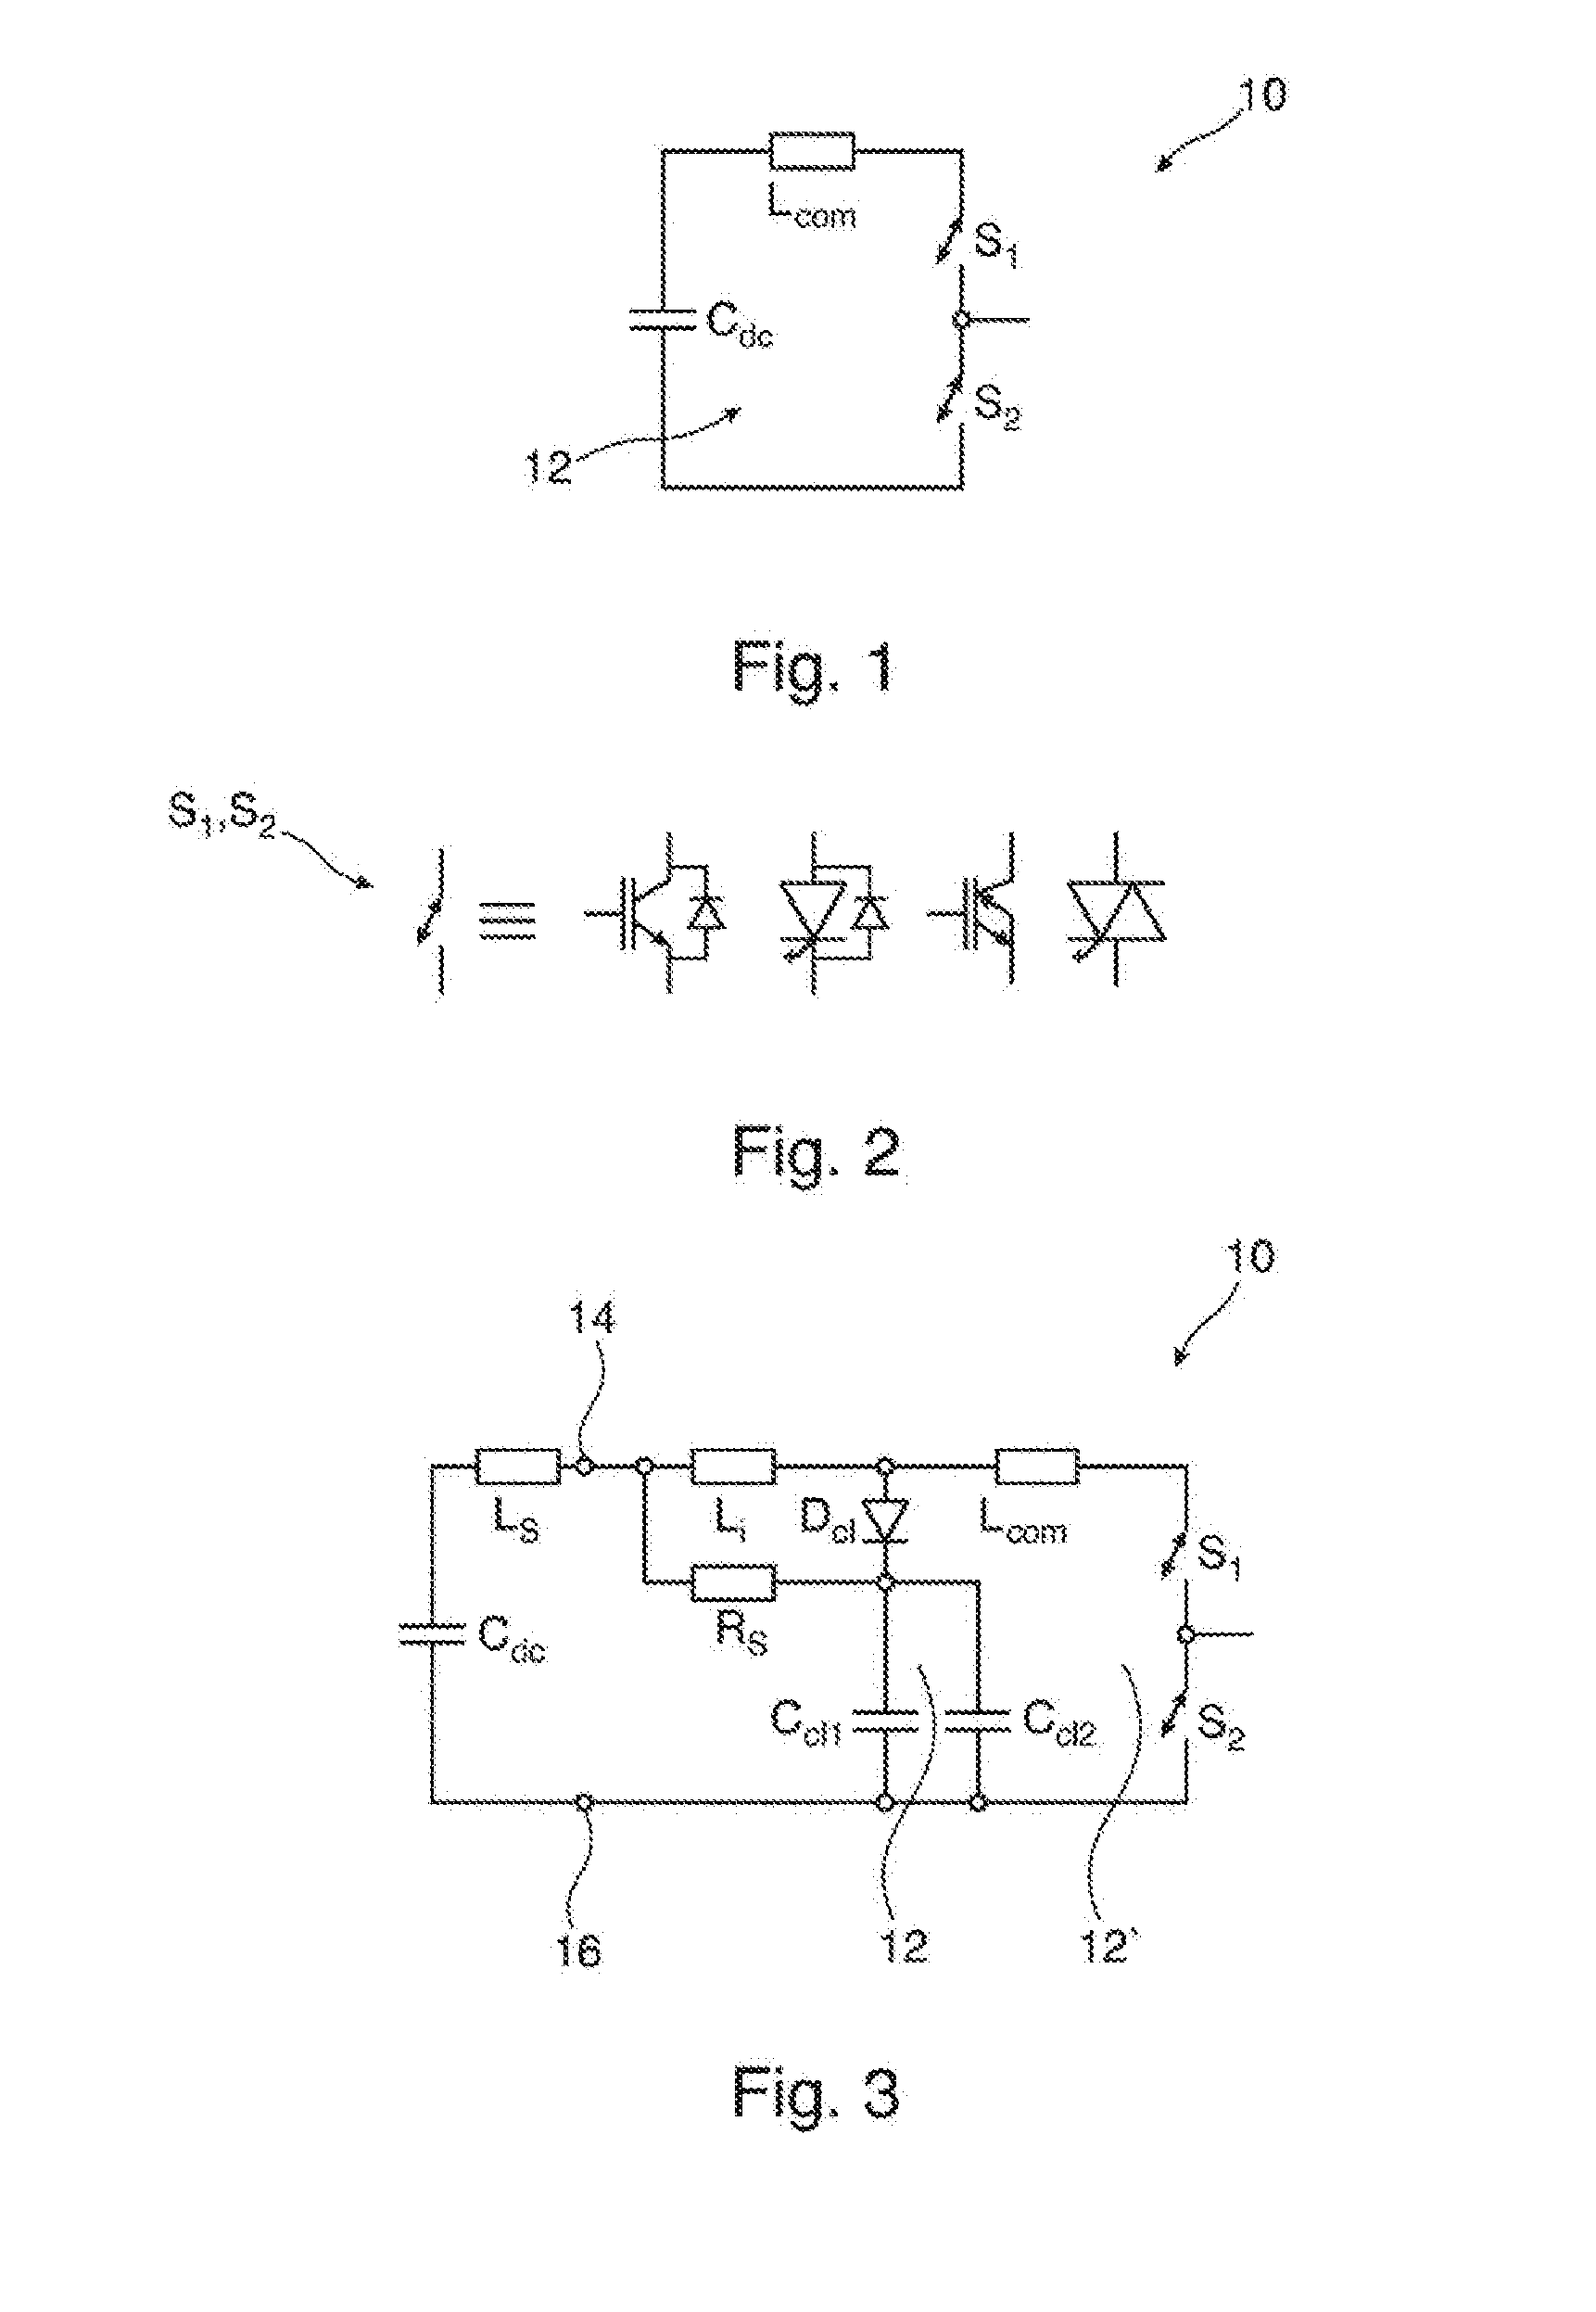 Semiconductor stack for converter with snubber capacitors